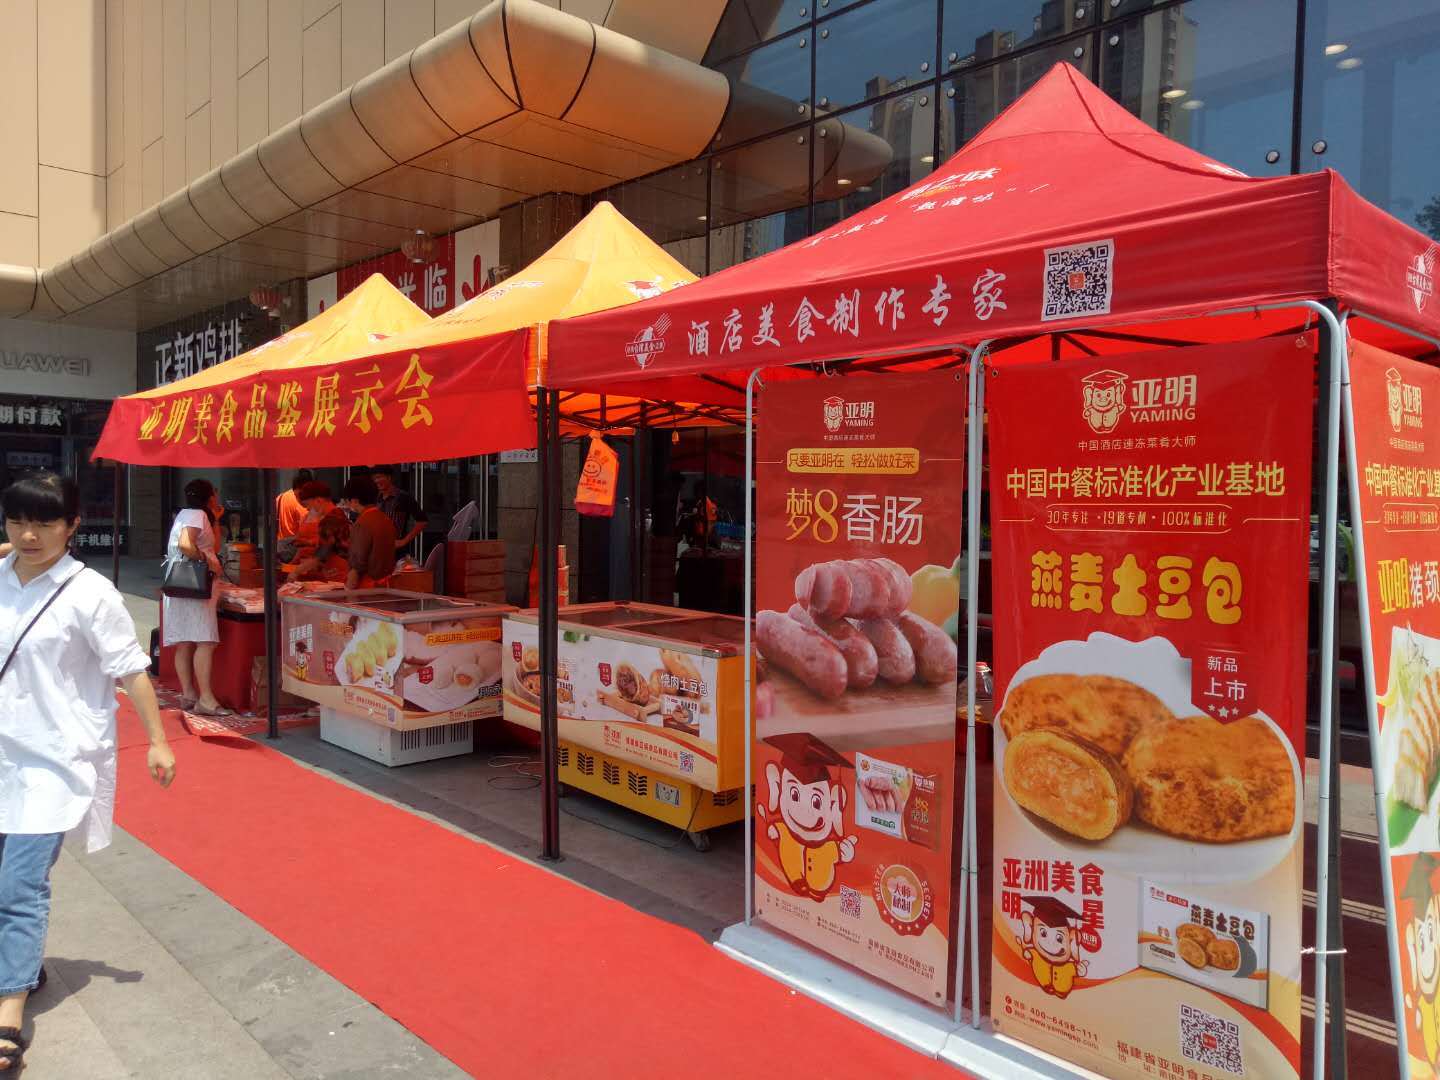 Yaming Food Experience Hall-Licheng Flagship Store Held Food Tasting Exhibition